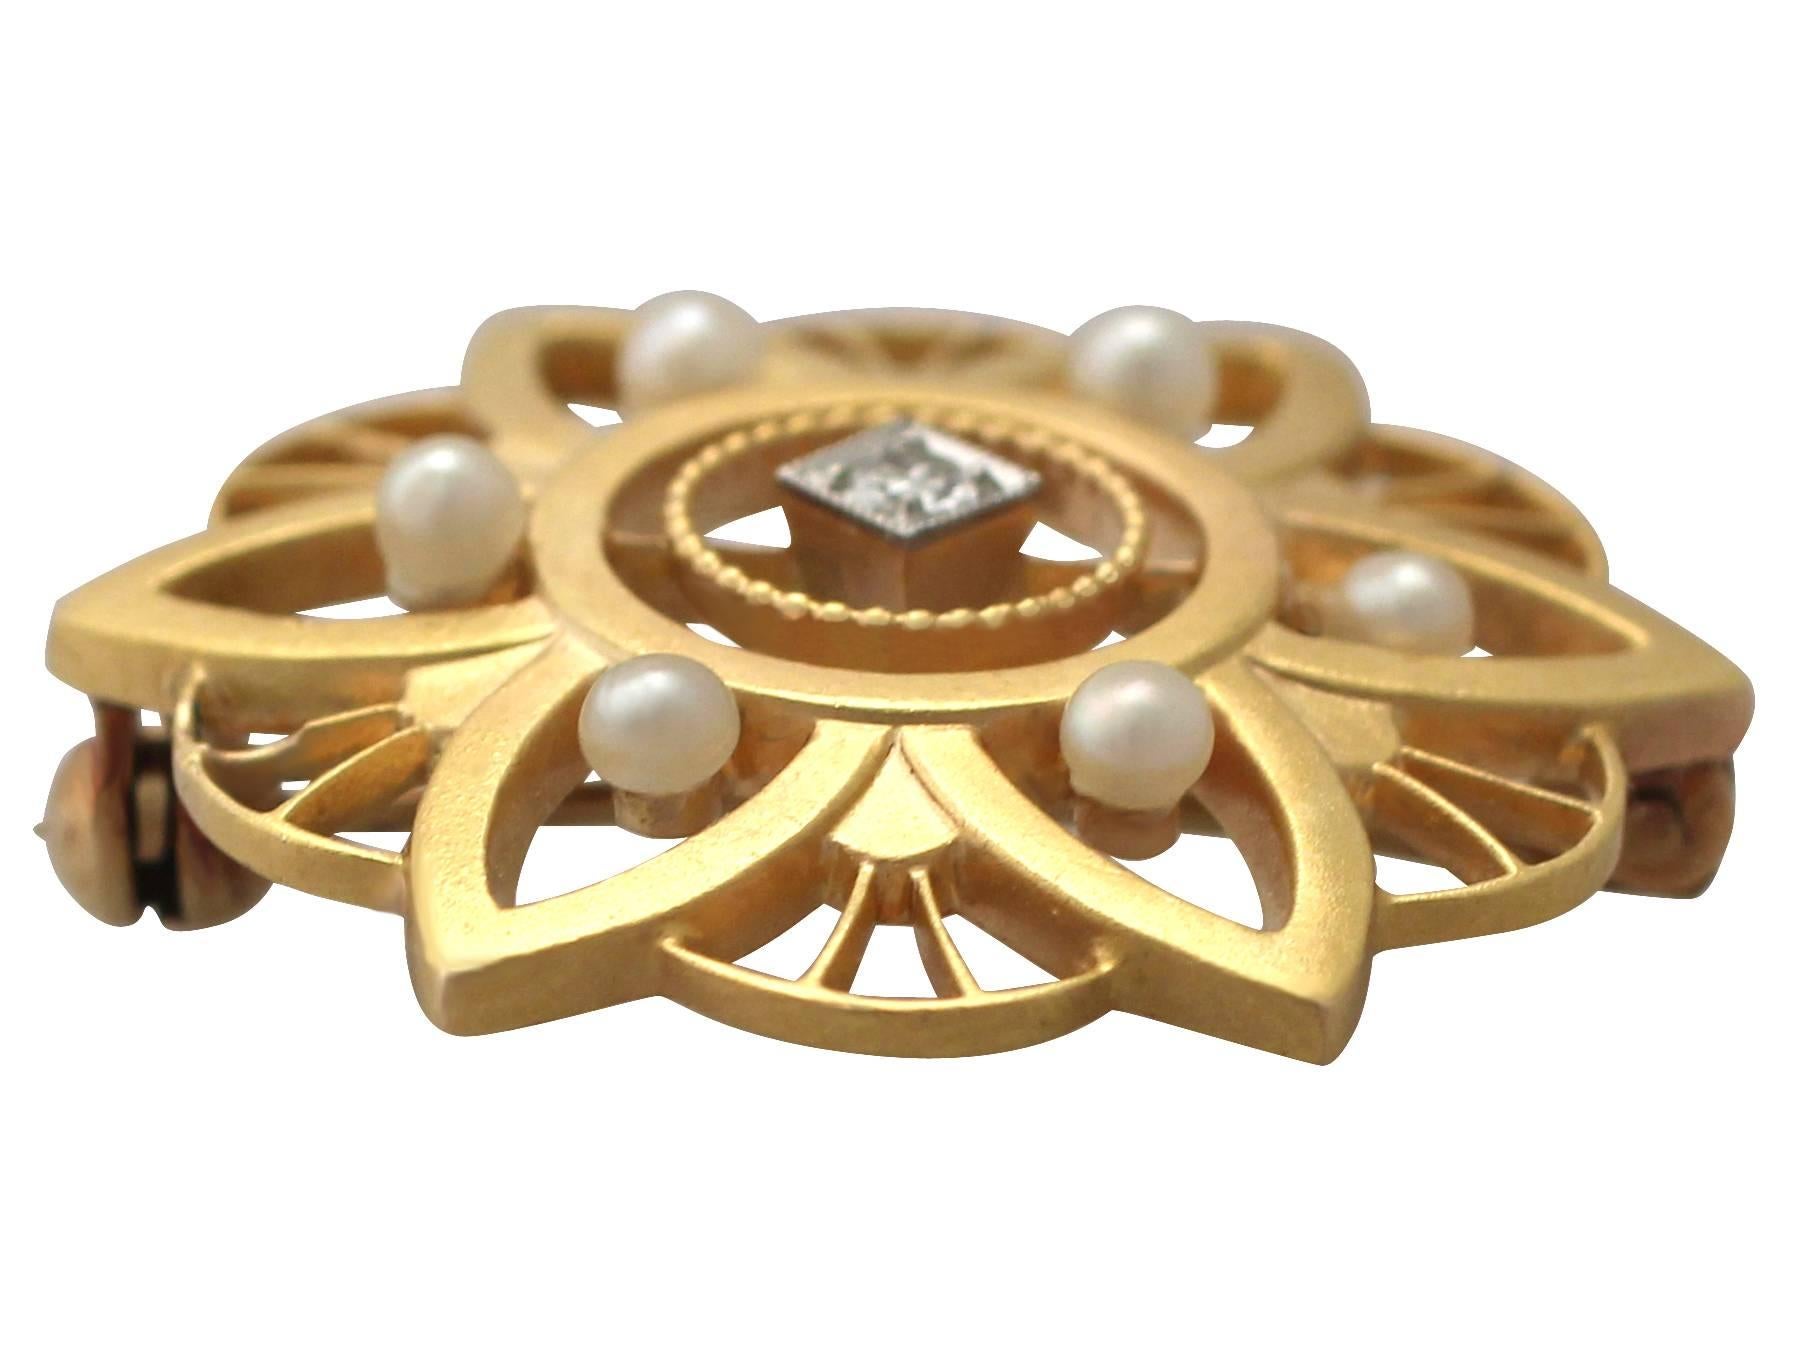 A fine and impressive seed pearl and diamond, 14k yellow gold brooch; part of our diverse antique jewellery and estate jewelry collections

This impressive antique pearl brooch has been crafted in 14k yellow gold.

The brooch is ornamented with